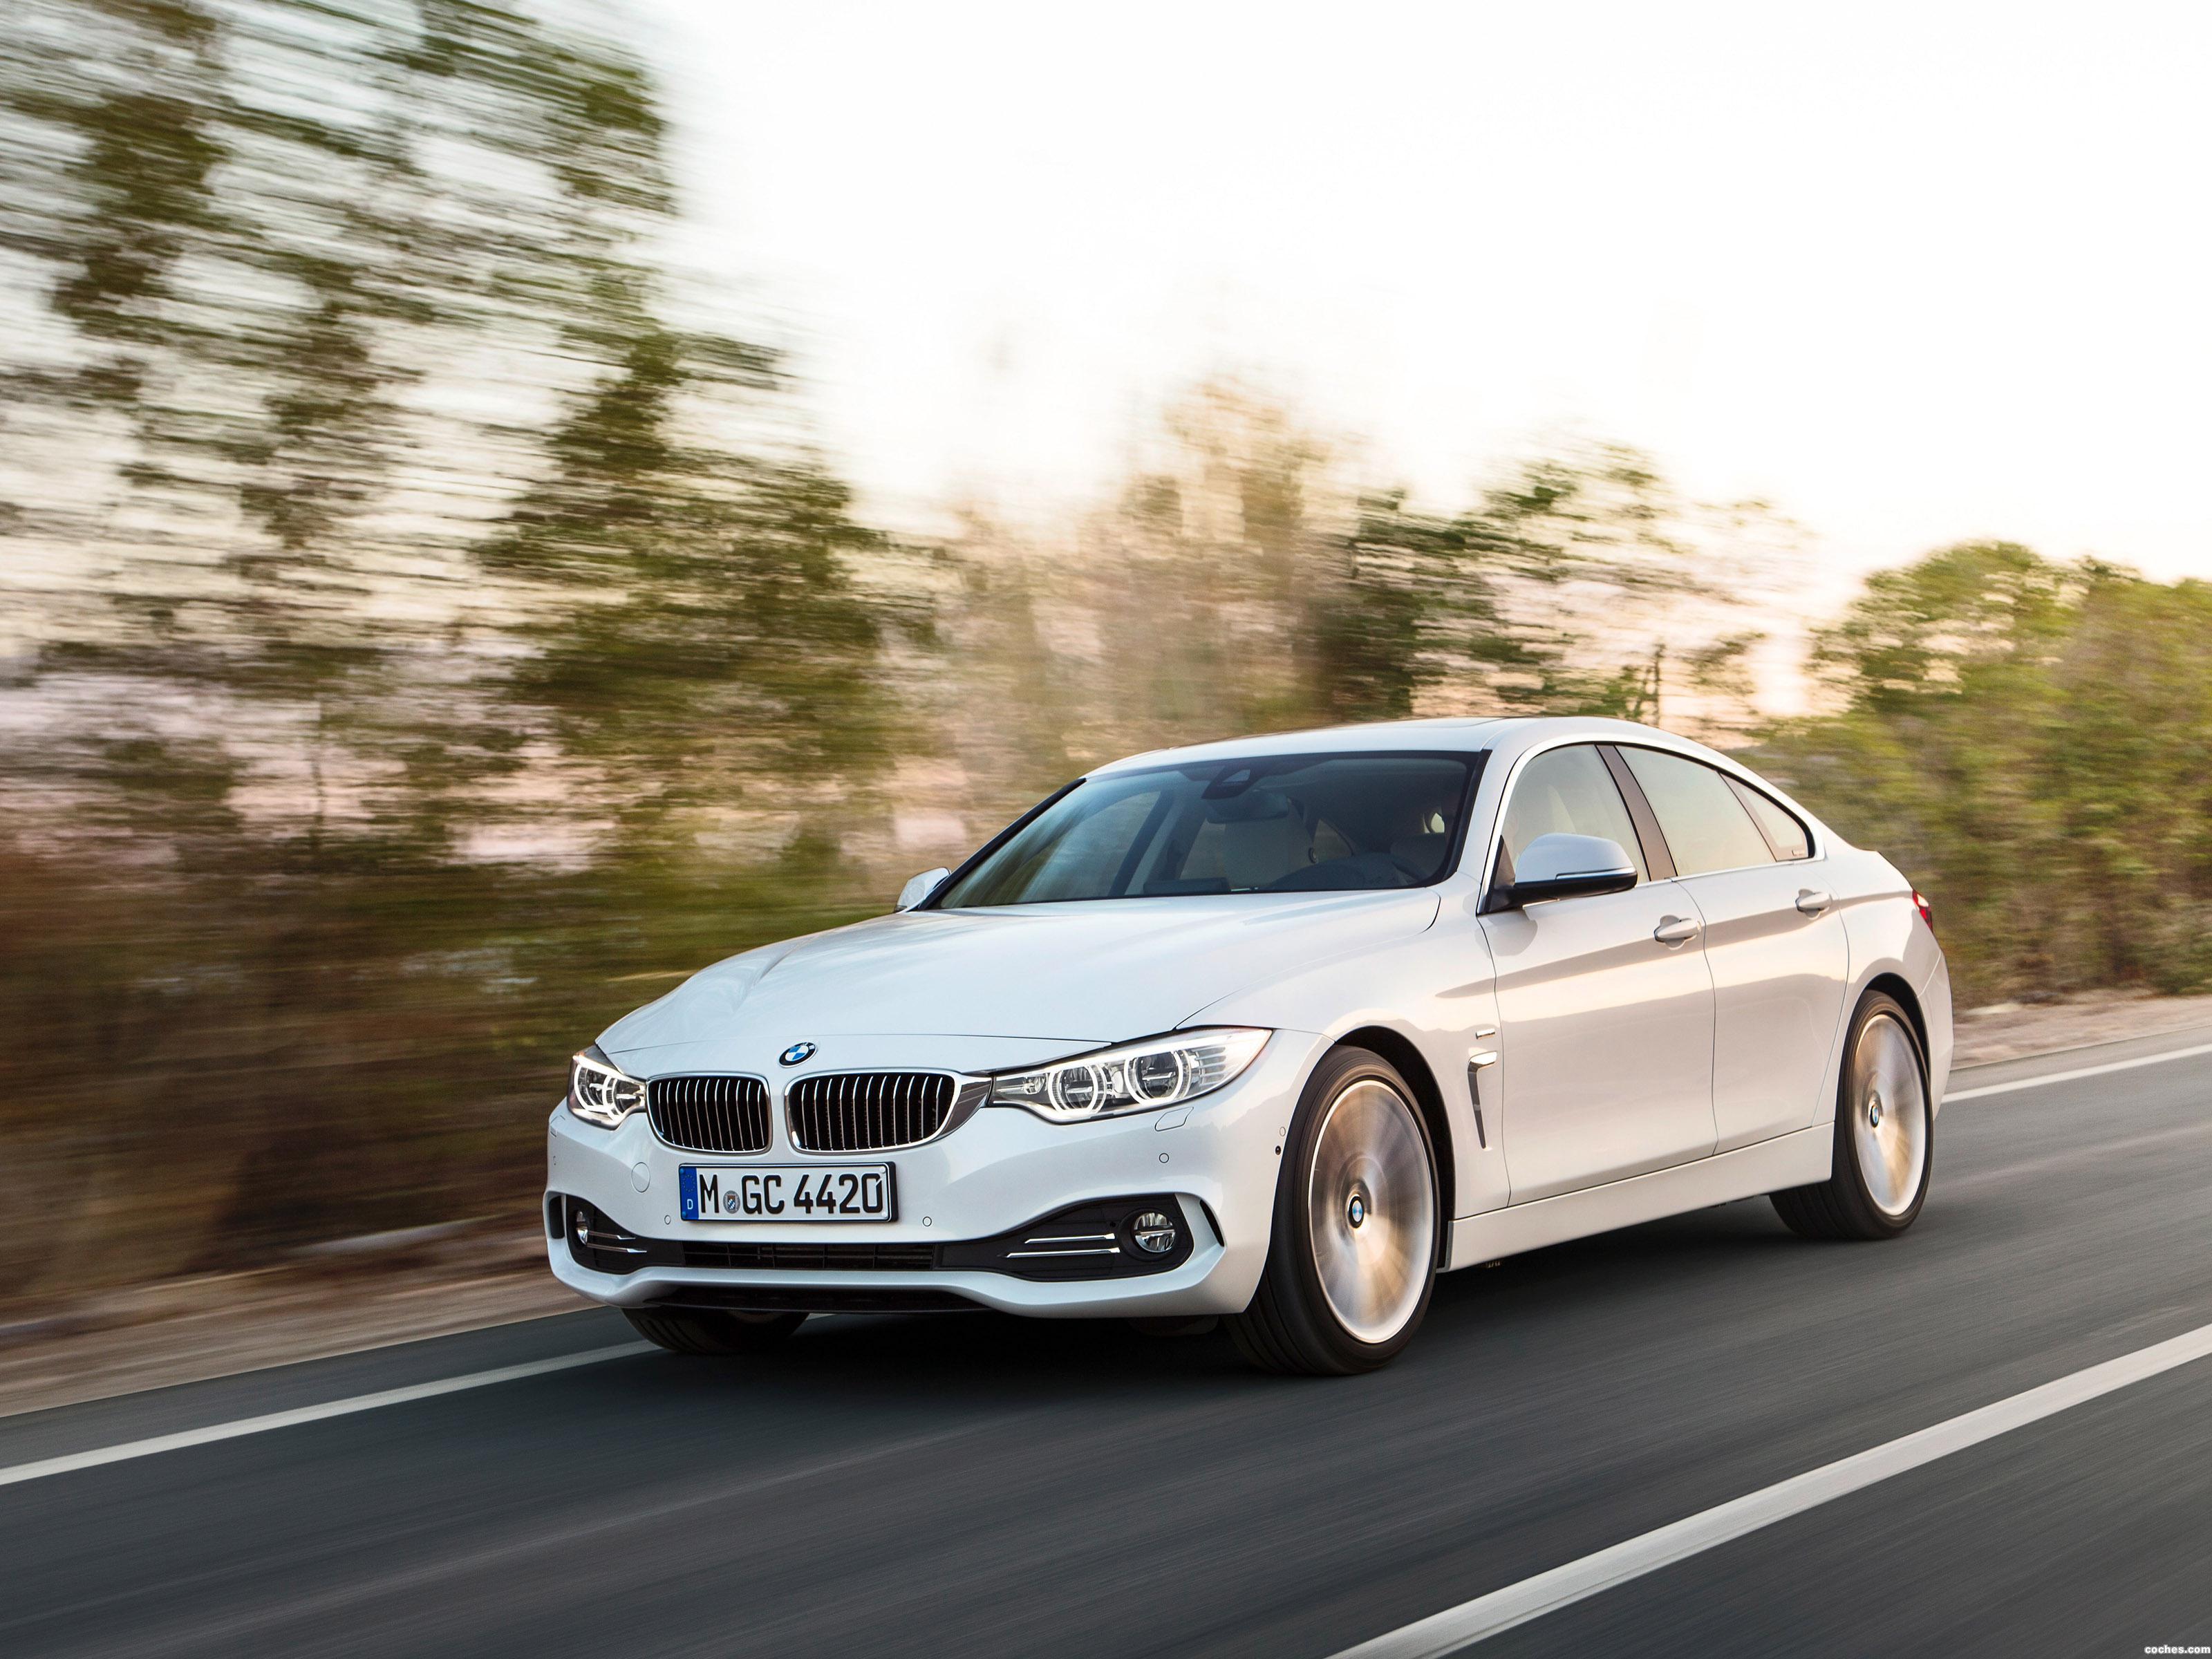 bmw_4-series-420d-gran-coupe-luxory-line-f36-2014_r21.jpg